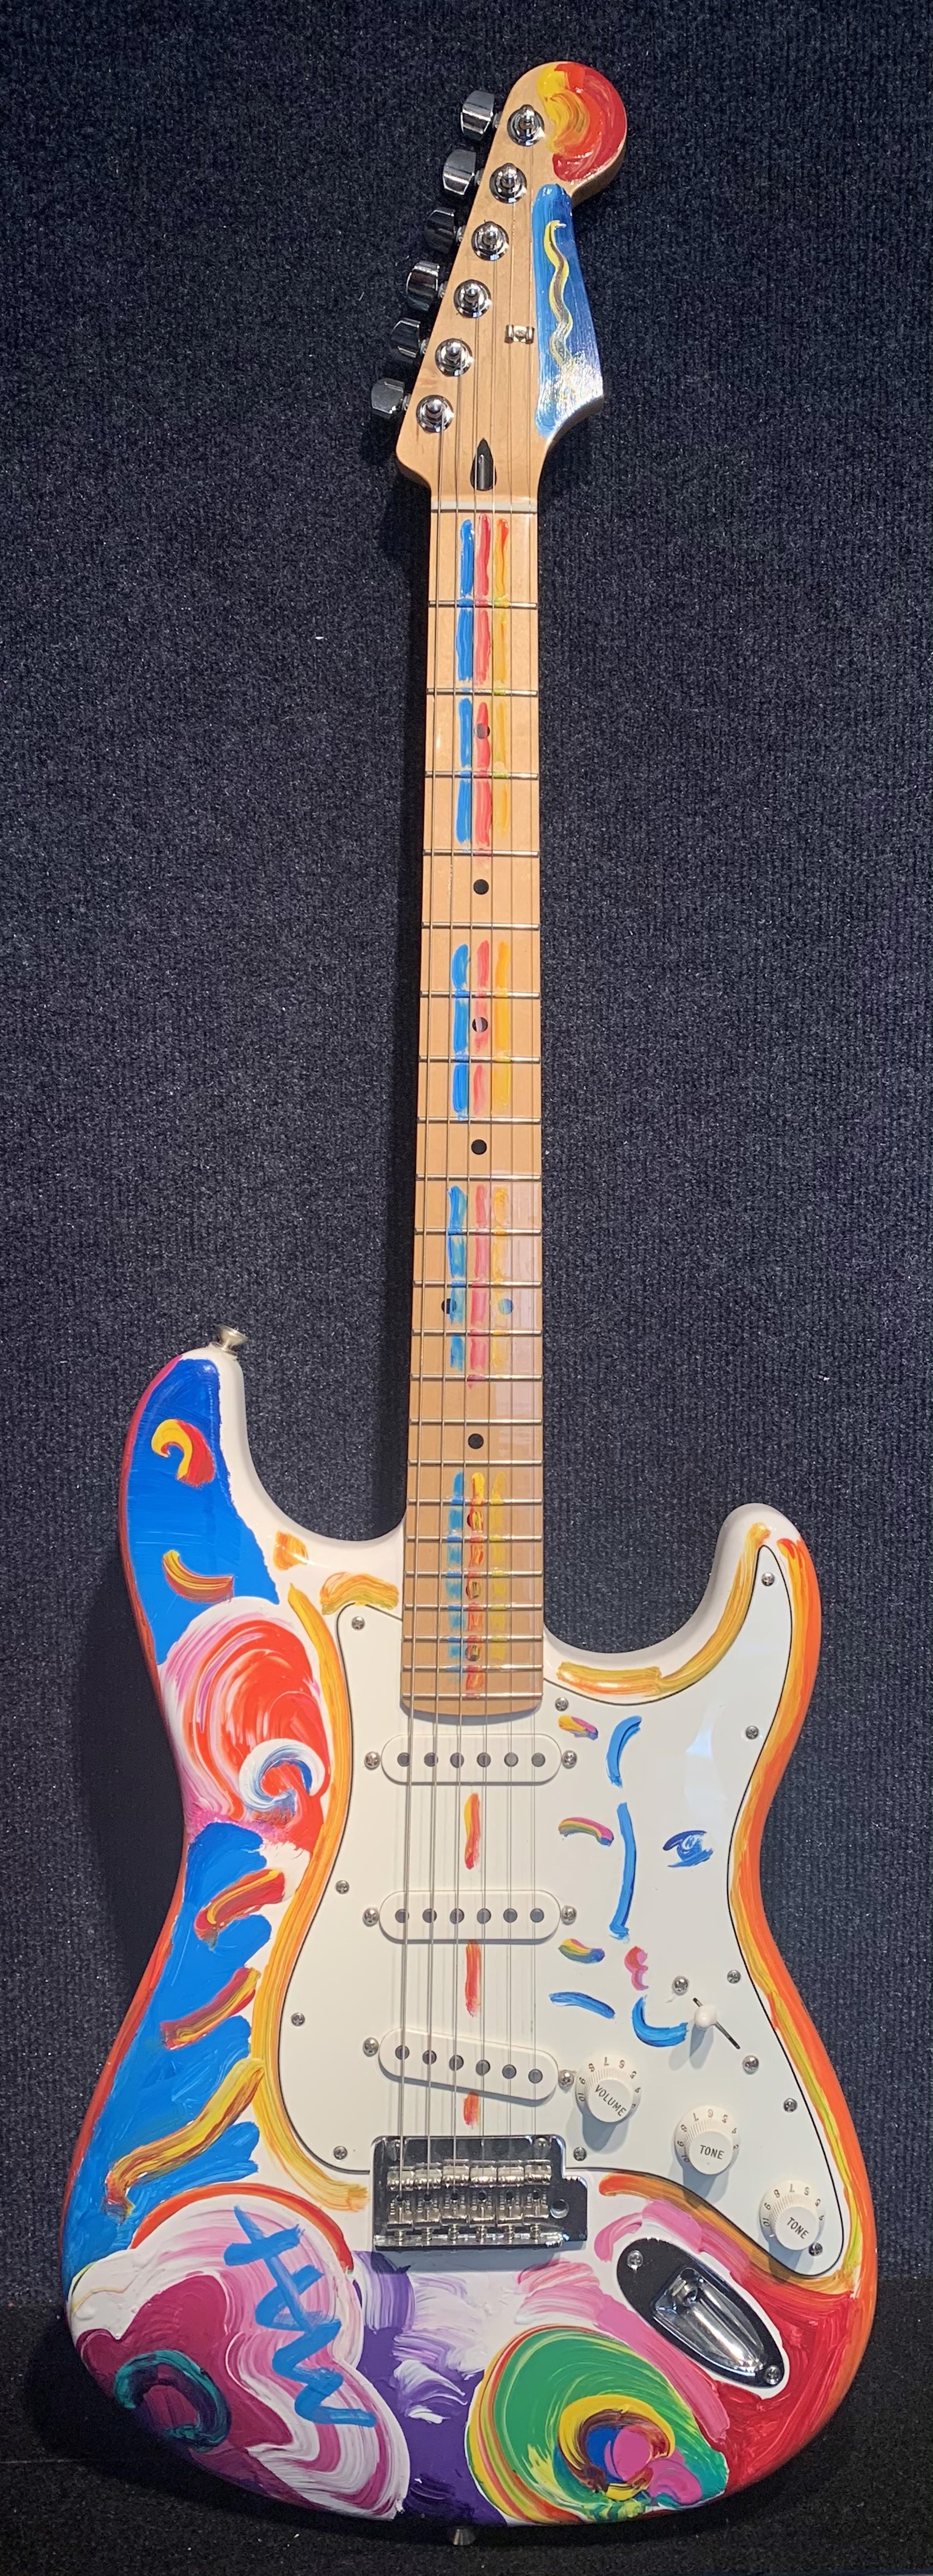 Guitar by Peter Max